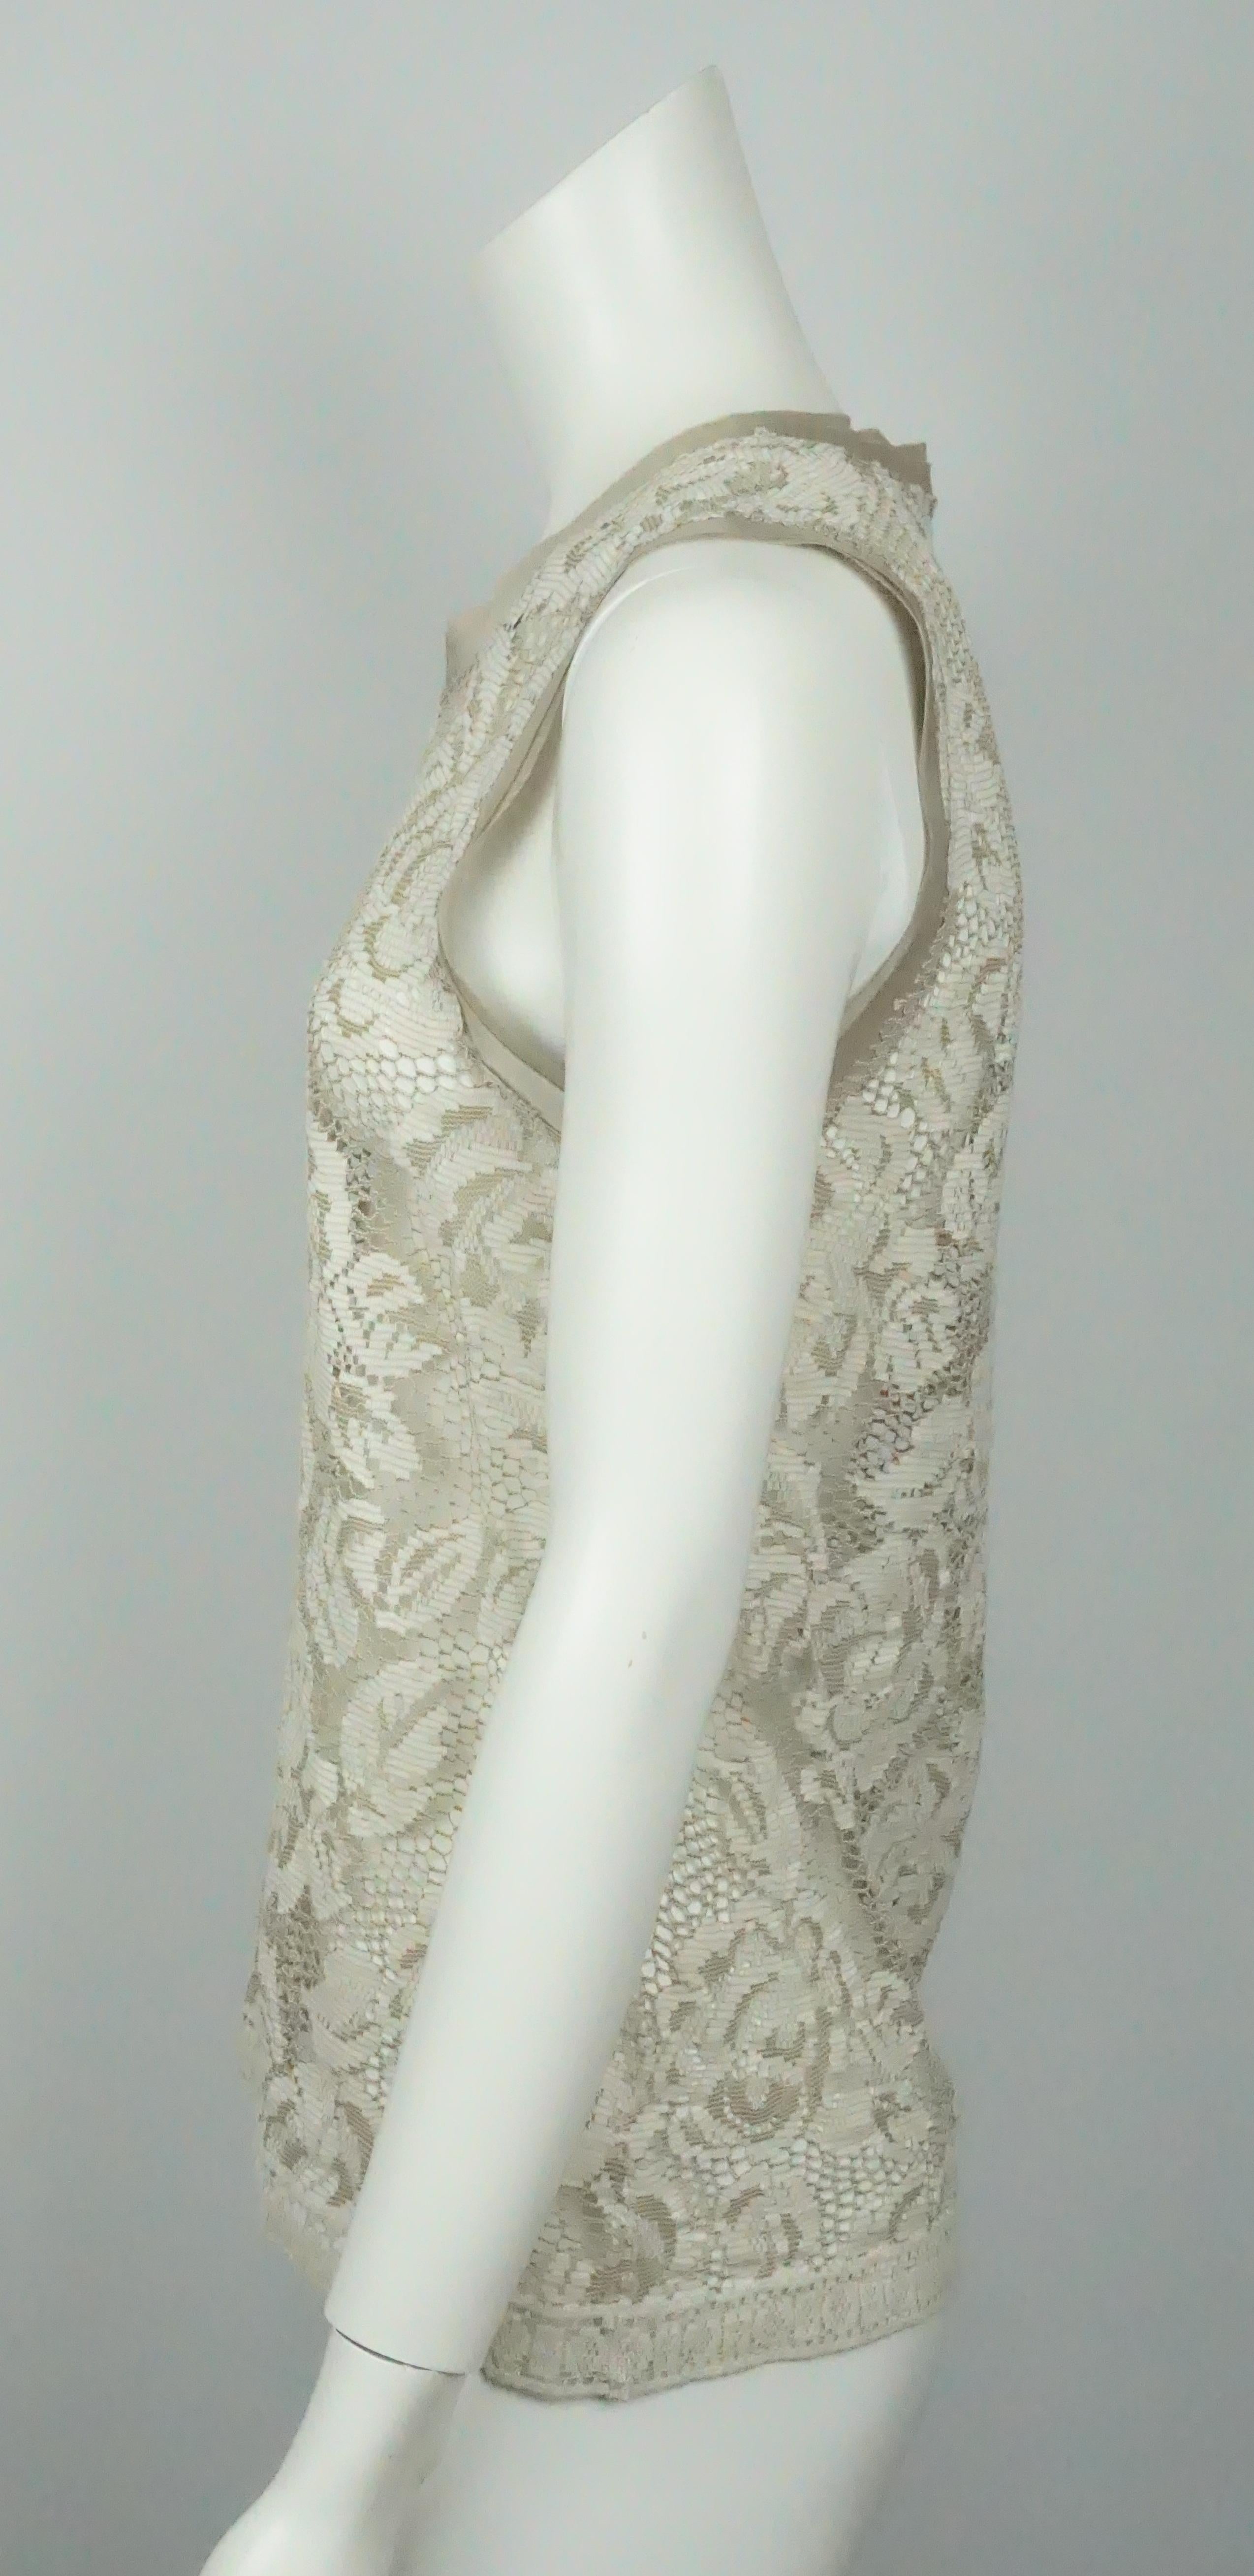 Dolce & Gabbana Taupe Sleeveless Lace Top - 42  This beautiful cotton top is in excellent condition. The top is completely sheer and has a floral and leaf design throughout. The fabric has a lace look to it. The neck hole and the arms hole are